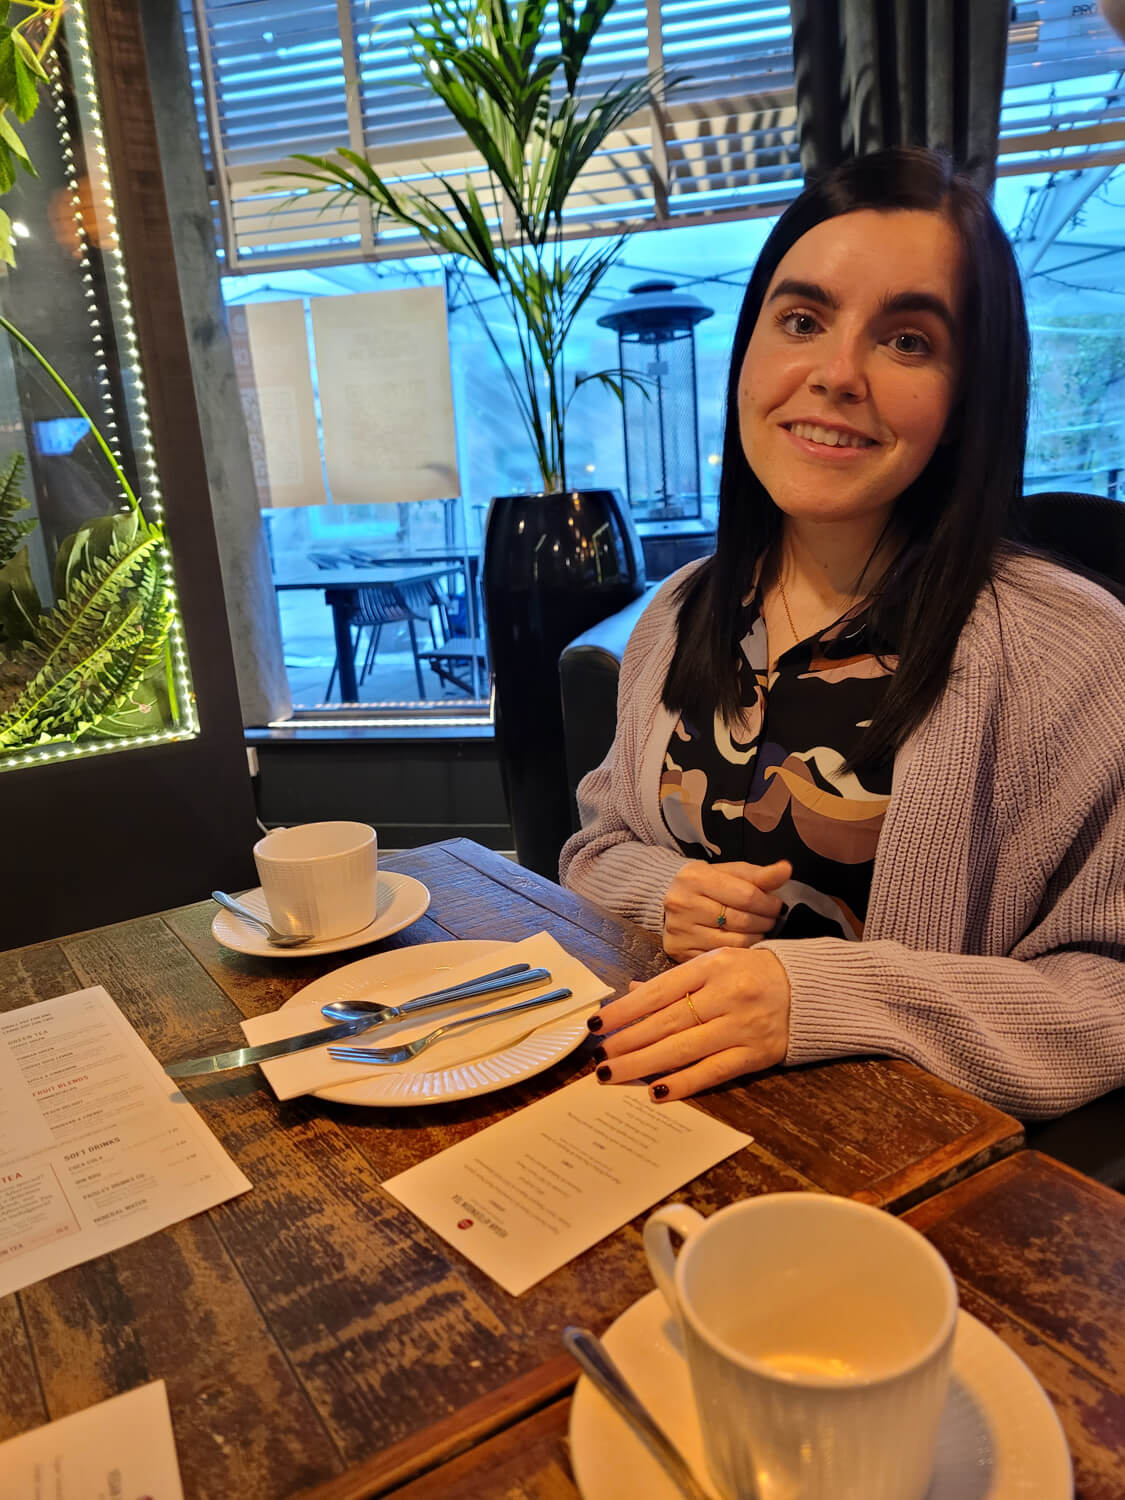 Emma sitting at the table in the restaurant. She is wearing a purple cardigan with a black blouse with different patterns and shapes.